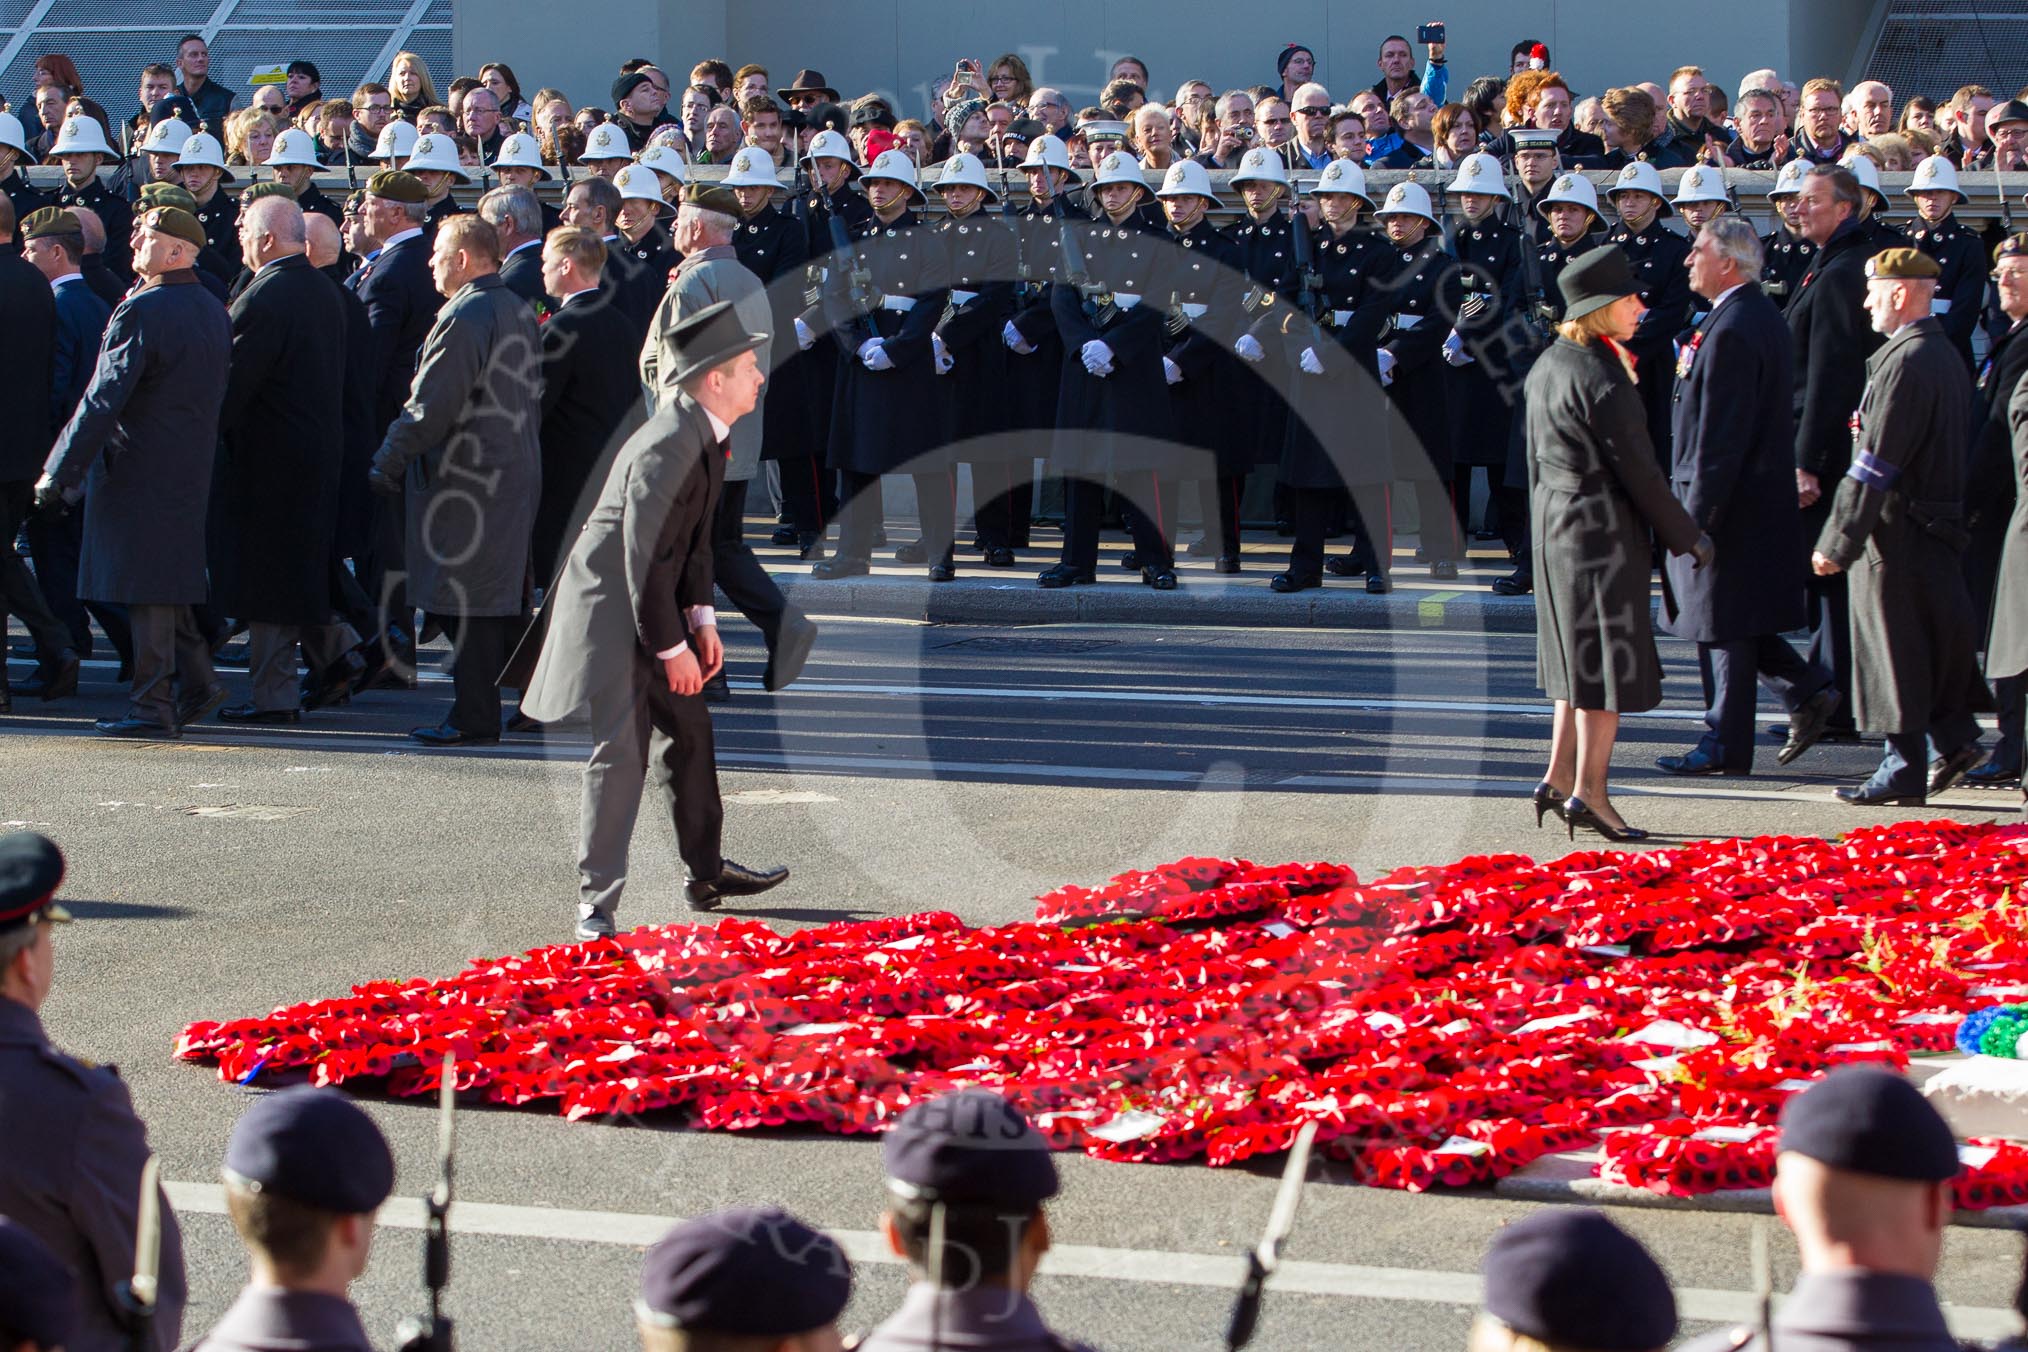 Remembrance Sunday 2012 Cenotaph March Past: Wreaths are placed at the western side of the Cenotaph during the March Past, creating a field of red poppies..
Whitehall, Cenotaph,
London SW1,

United Kingdom,
on 11 November 2012 at 11:53, image #763